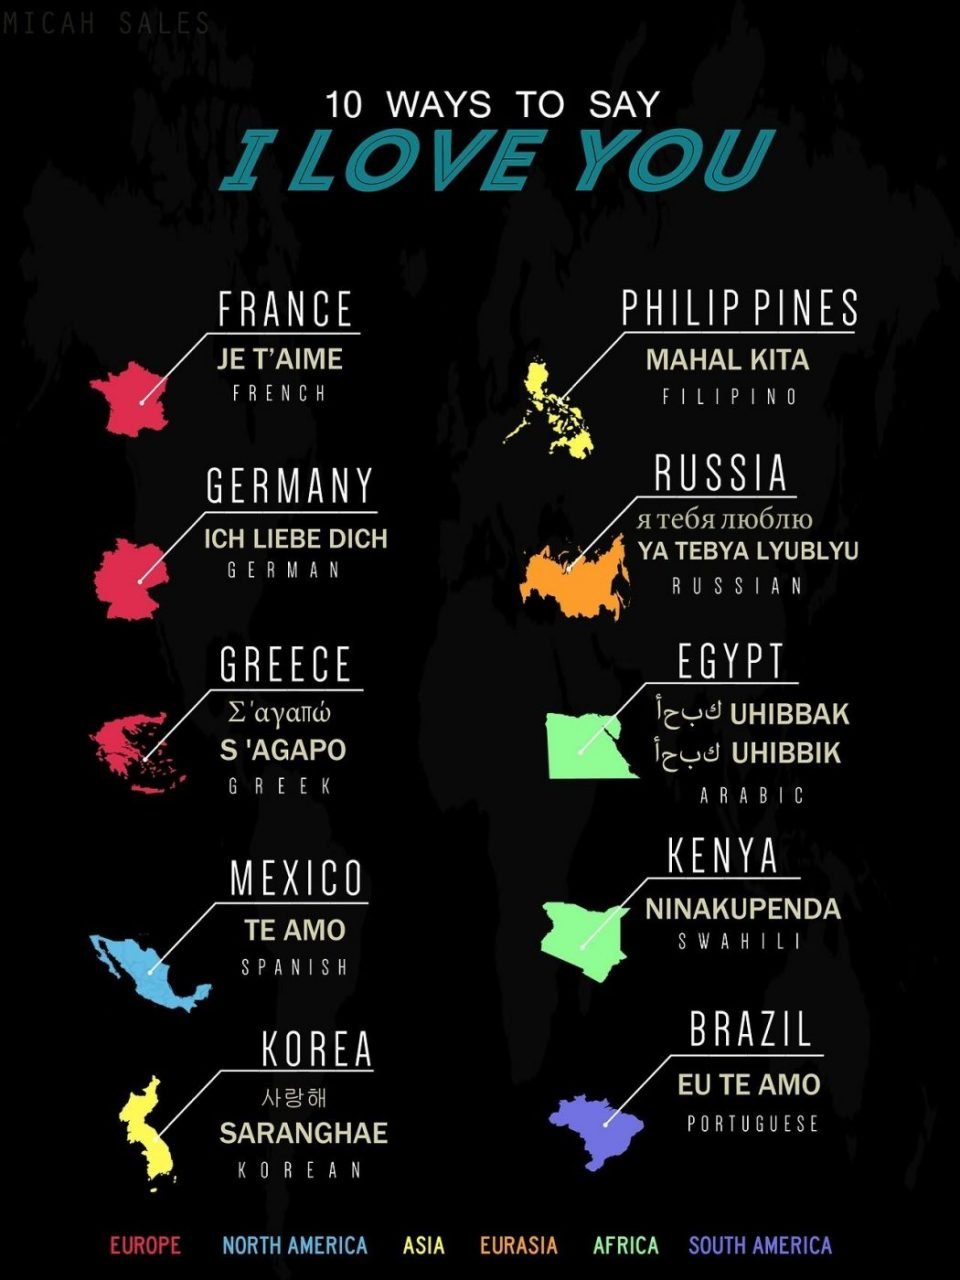 I love you in 10 languages